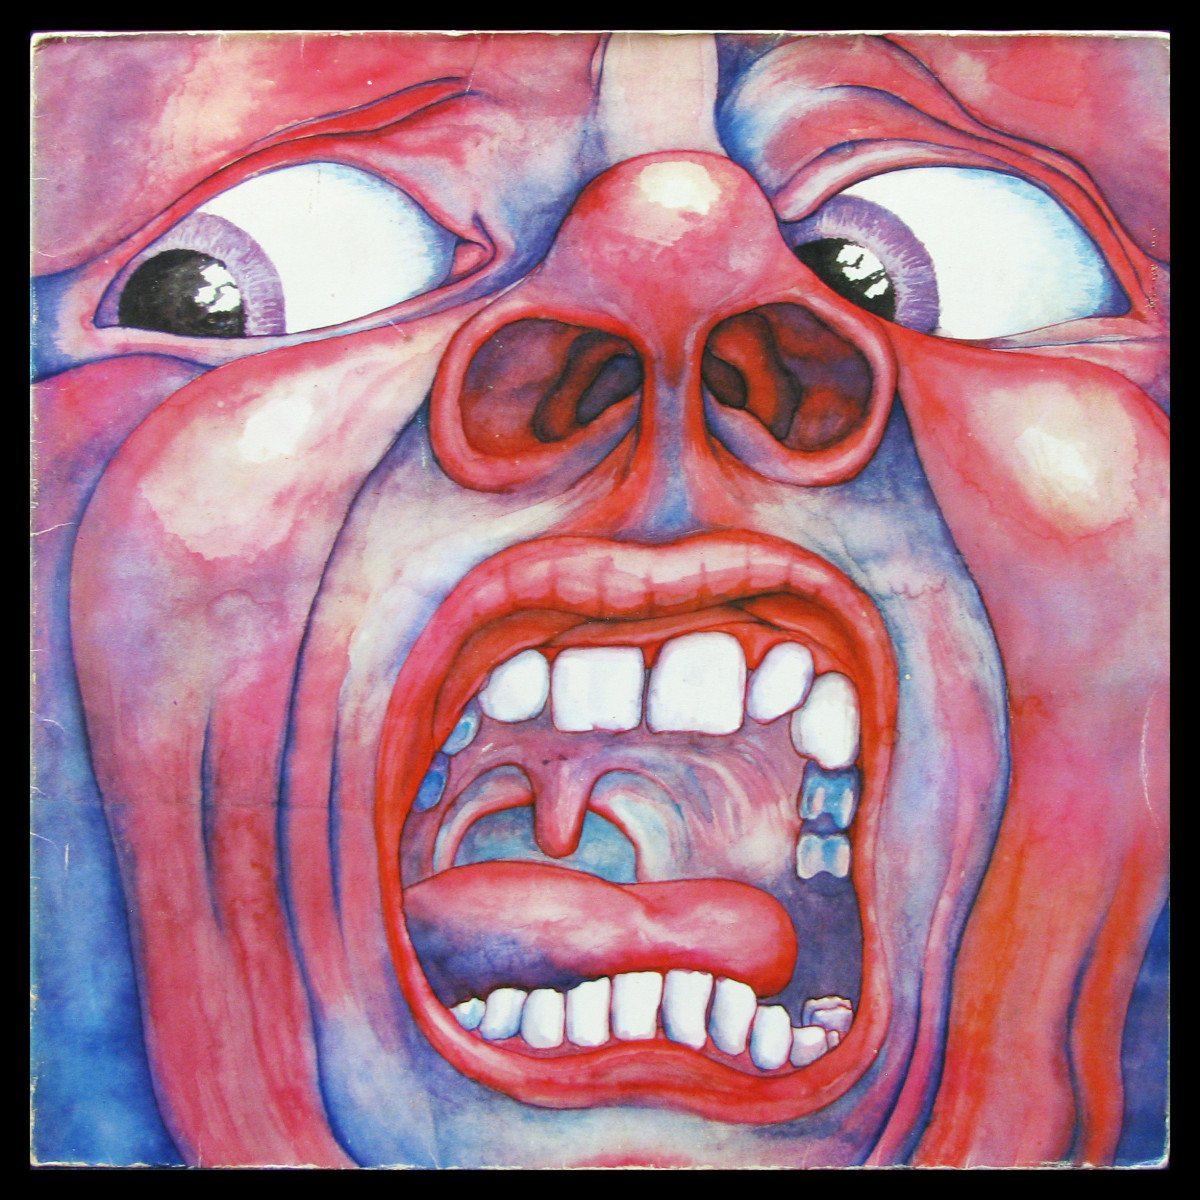 In The Court Of Crimson King